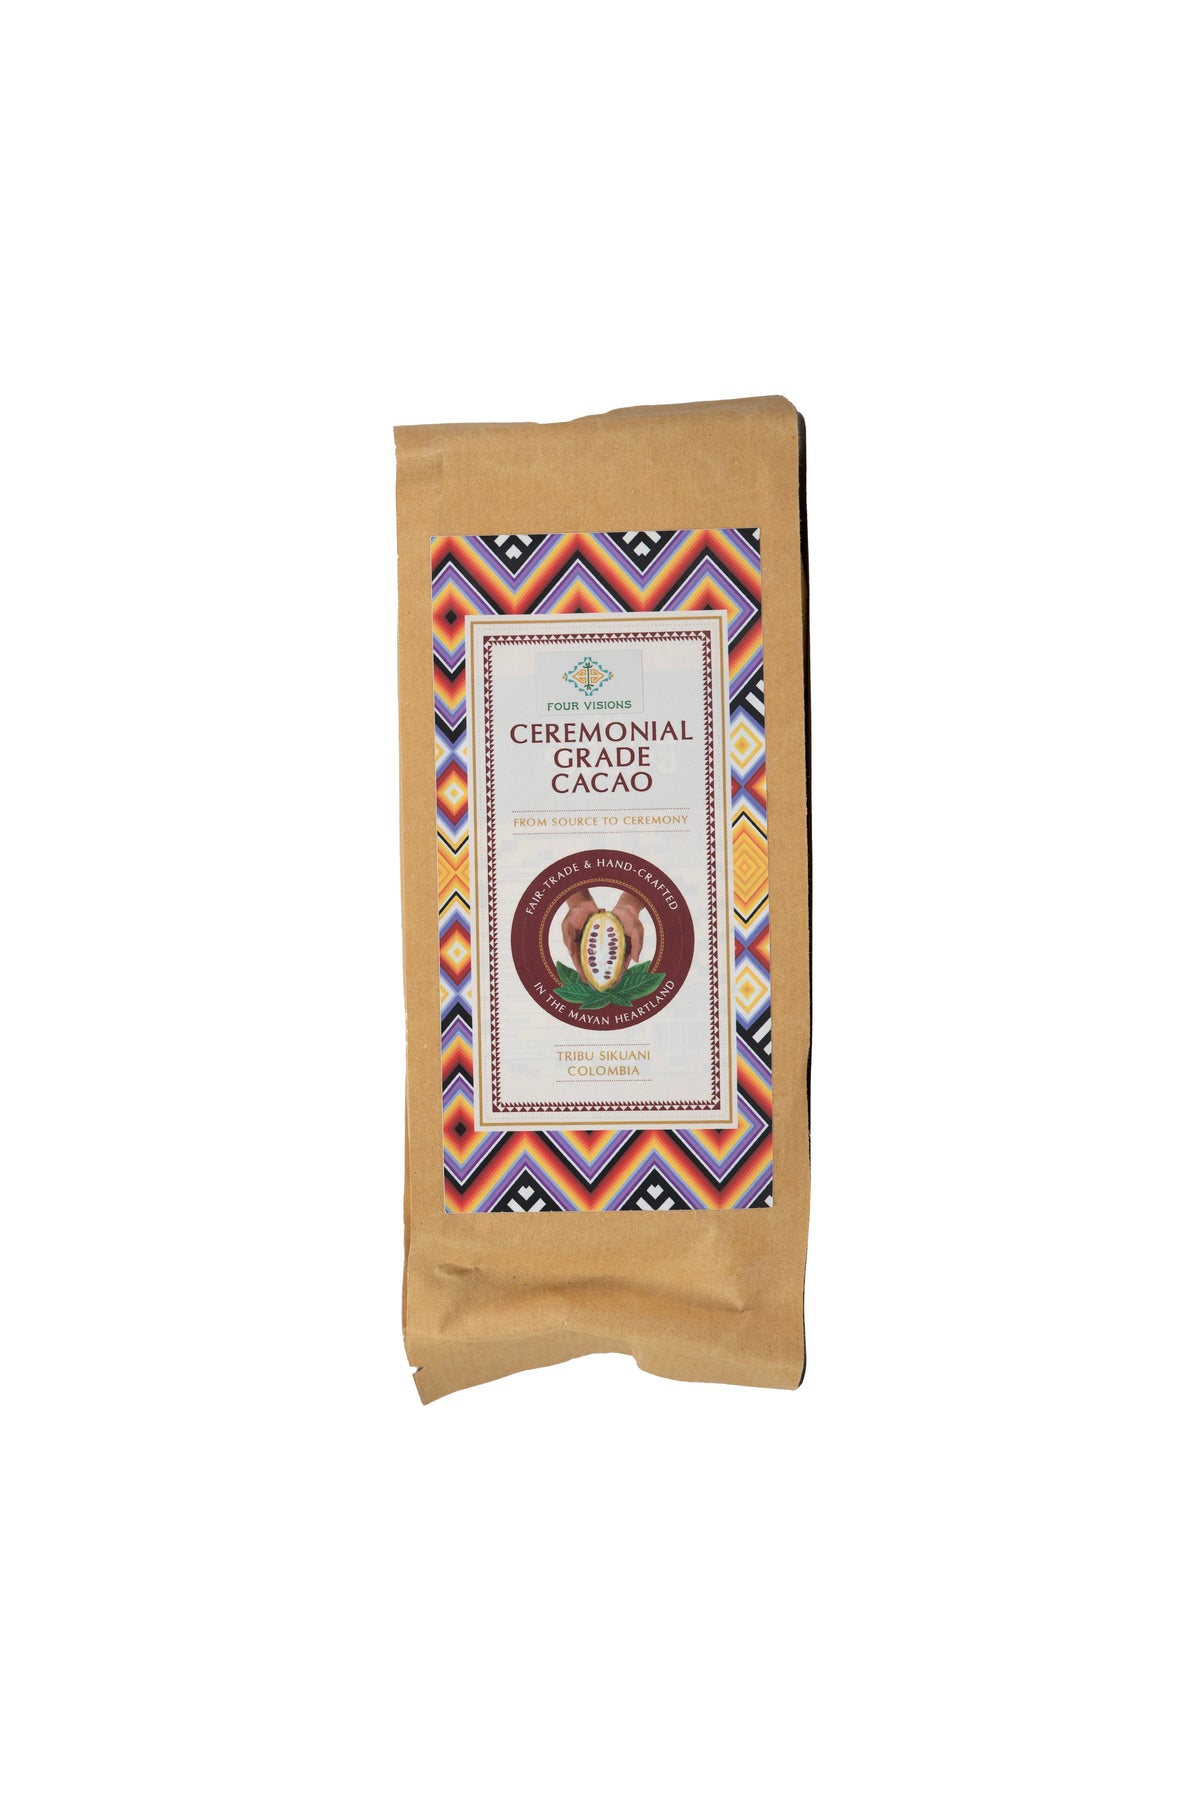 Sikuani Colombian Ceremonial Grade Cacao